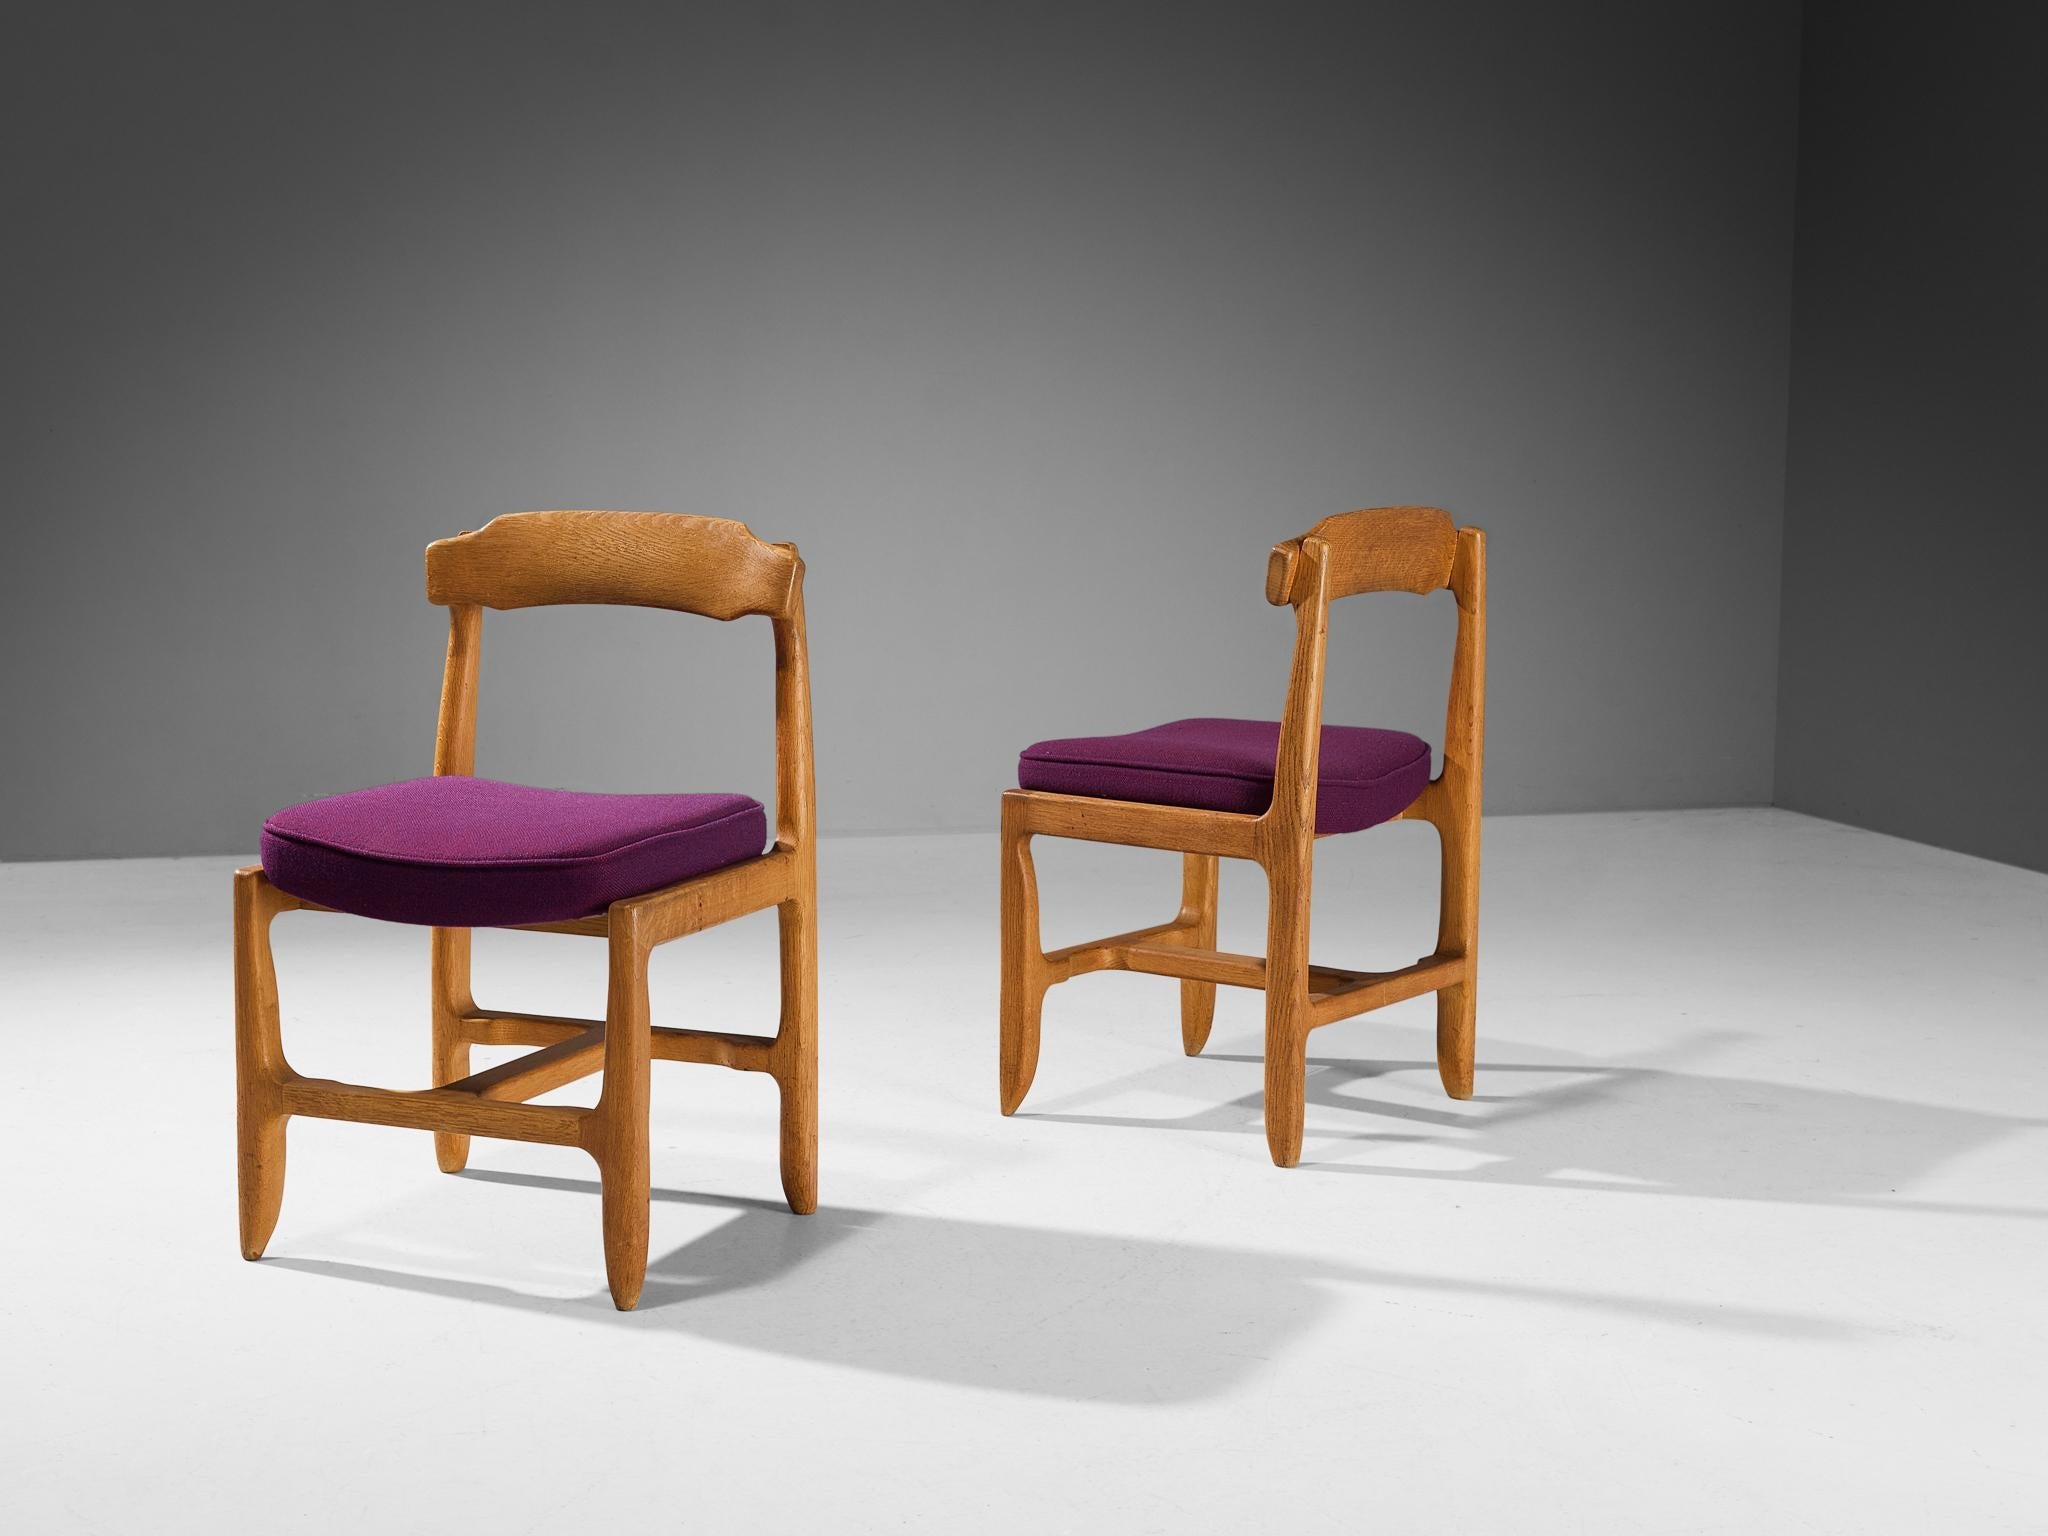 Guillerme & Chambron Pair of Dining Chairs in Oak and Purple Upholstery